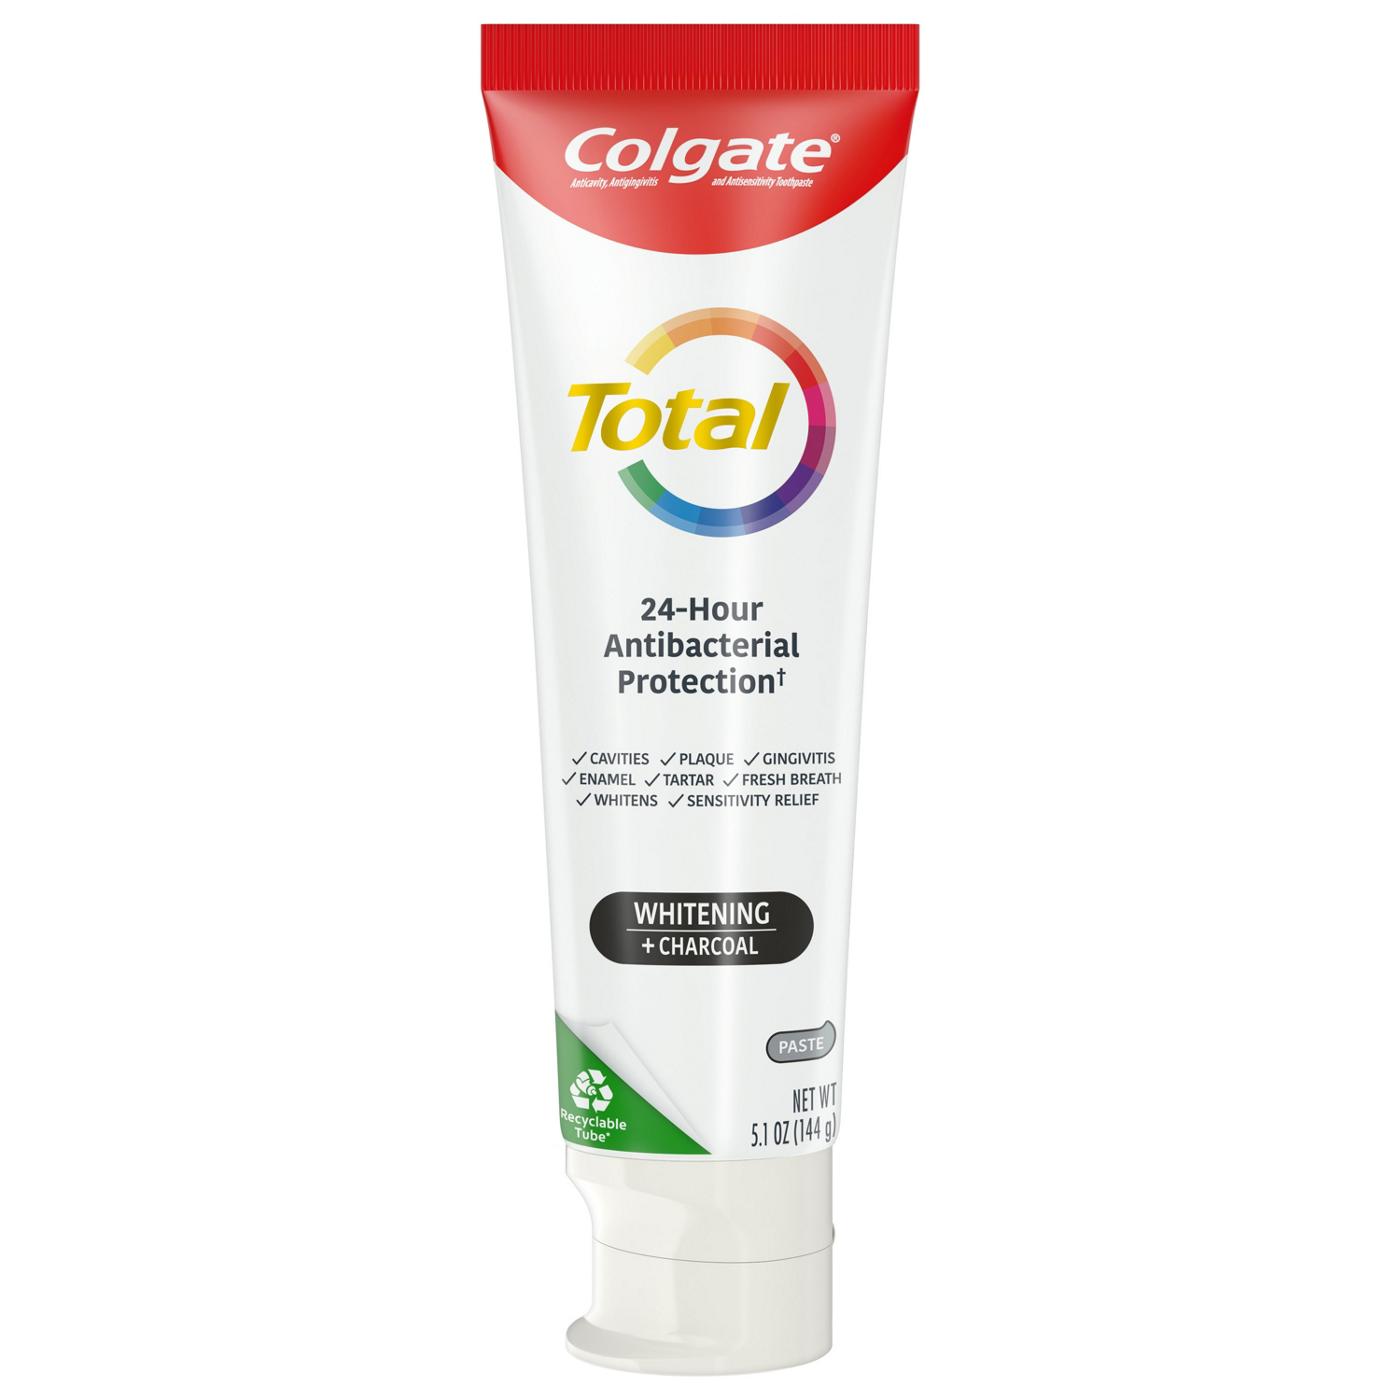 Colgate Total Whitening + Charcoal Toothpaste; image 12 of 12